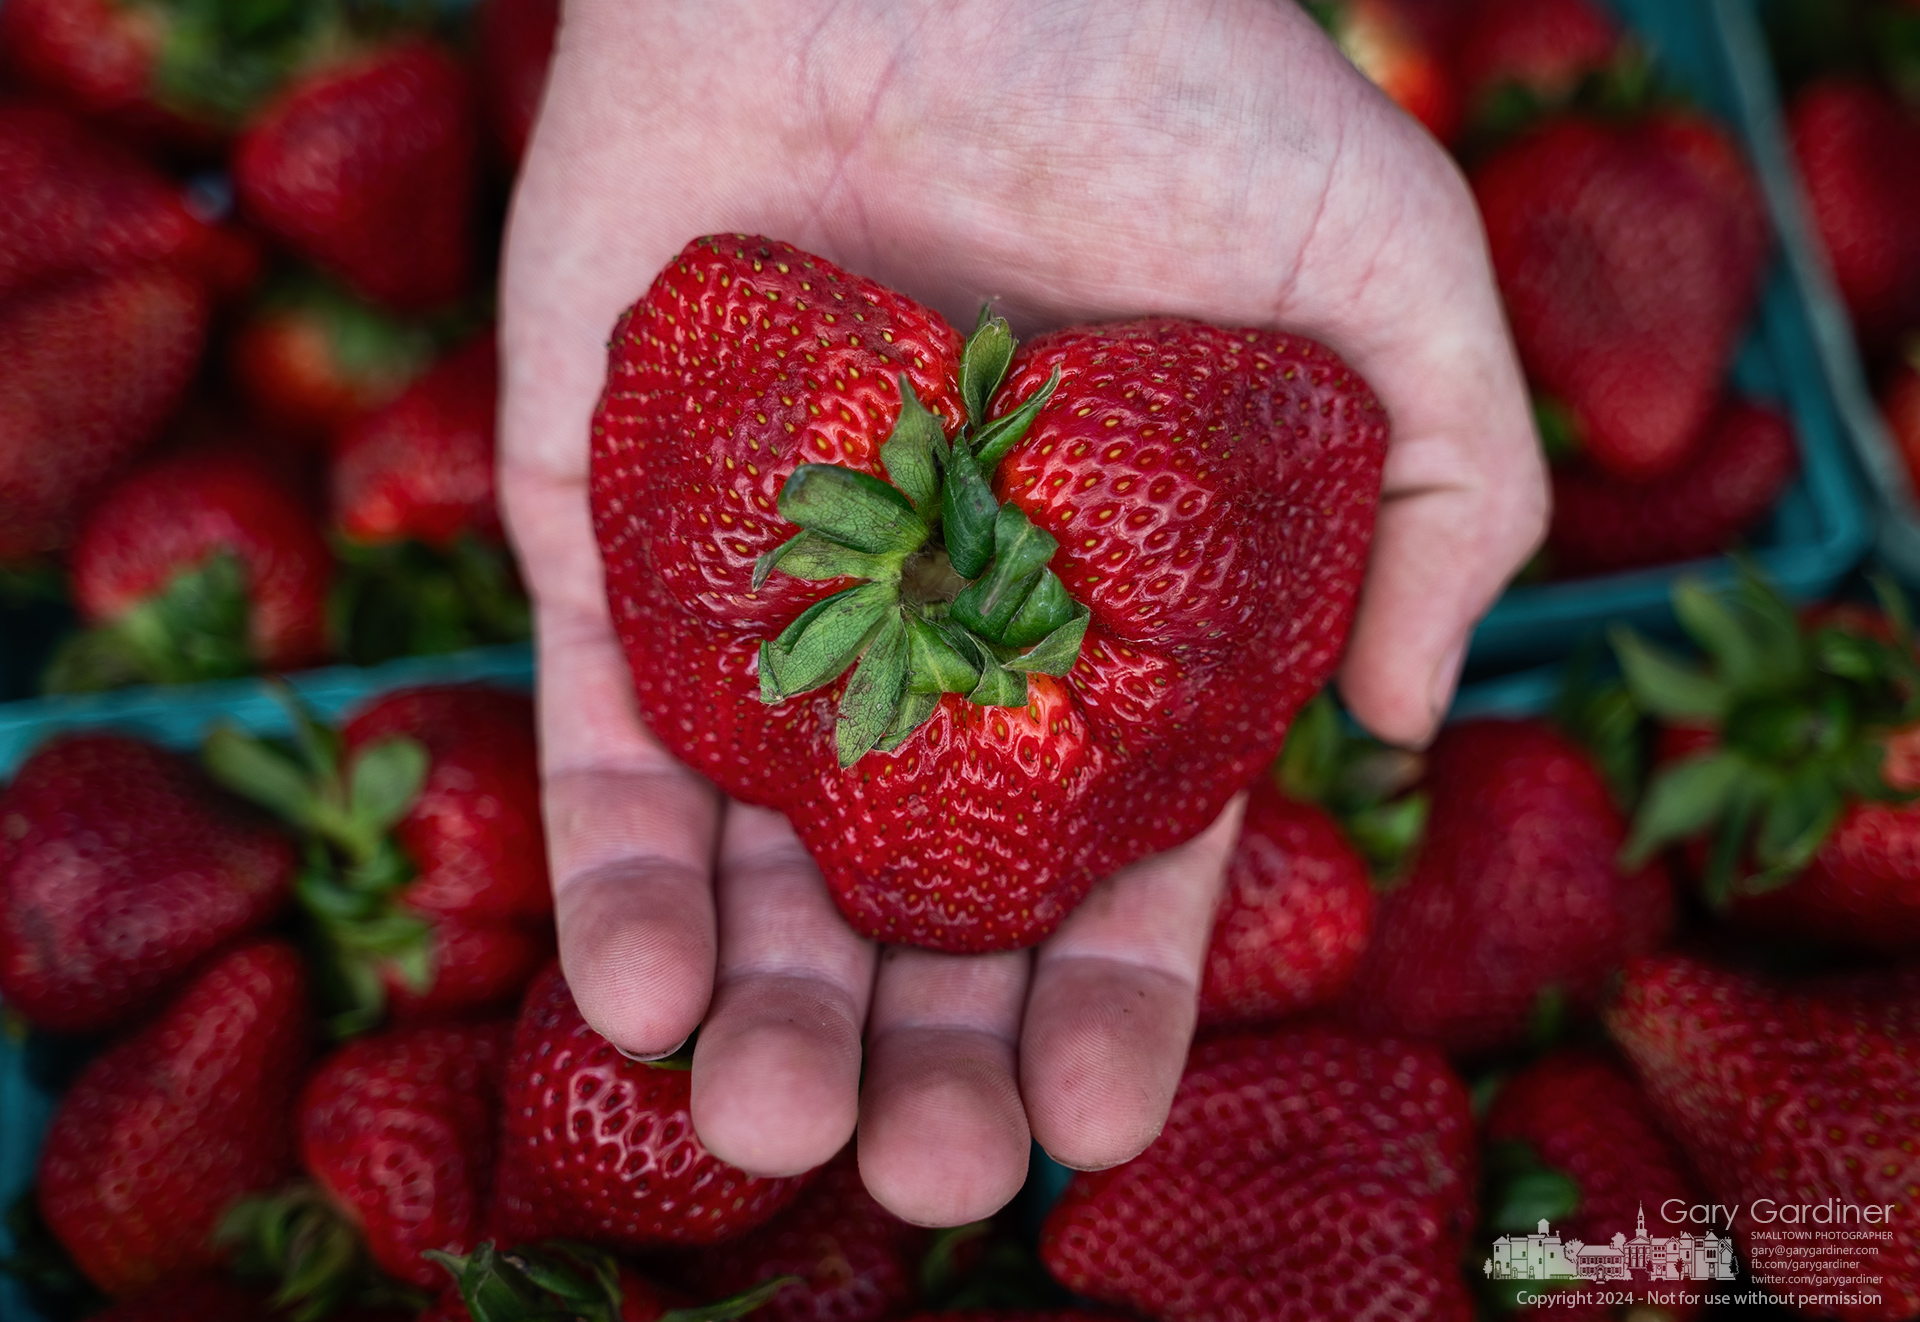 A farmer holds a four-inch-wide strawberry picked from his patch and offered as a portion of the display of his produce at the Saturday Farmers Market in Uptown. My Final Photo for May 18, 2024.